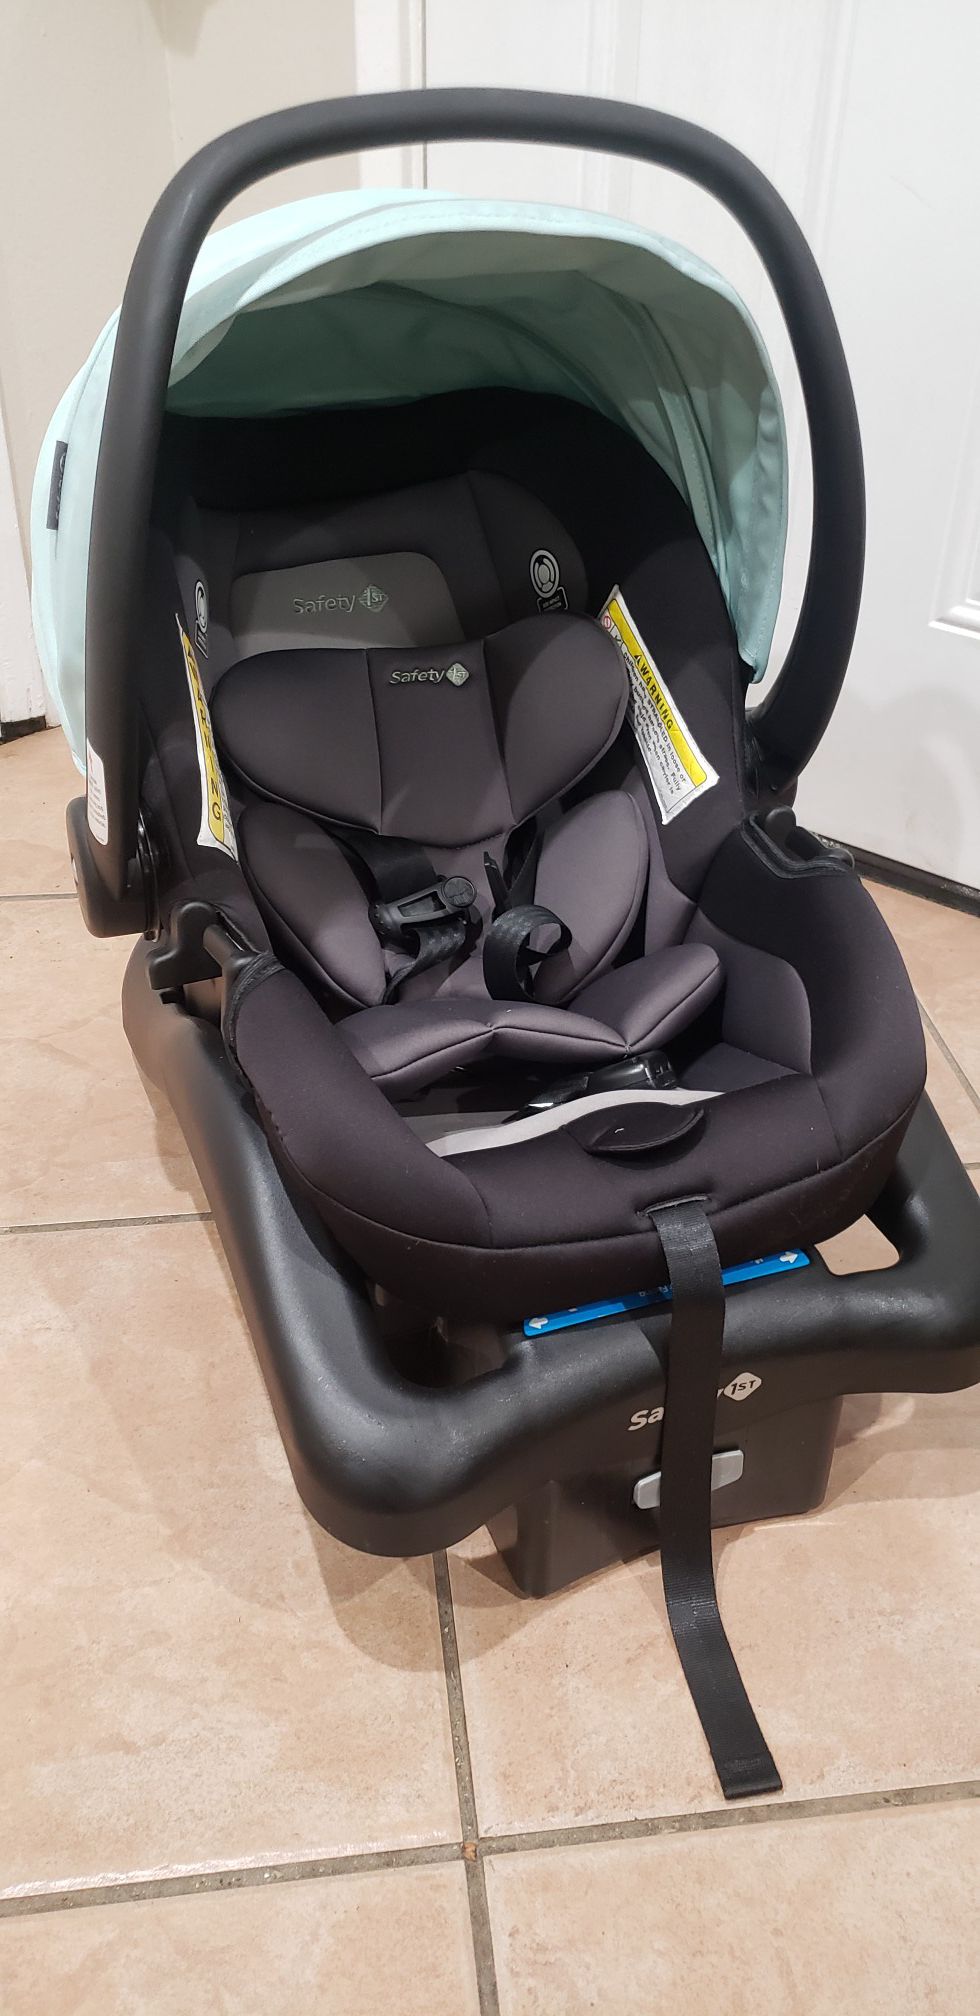 Like NEW Infant Safety1st onBoard 35 LT baby Car Seat